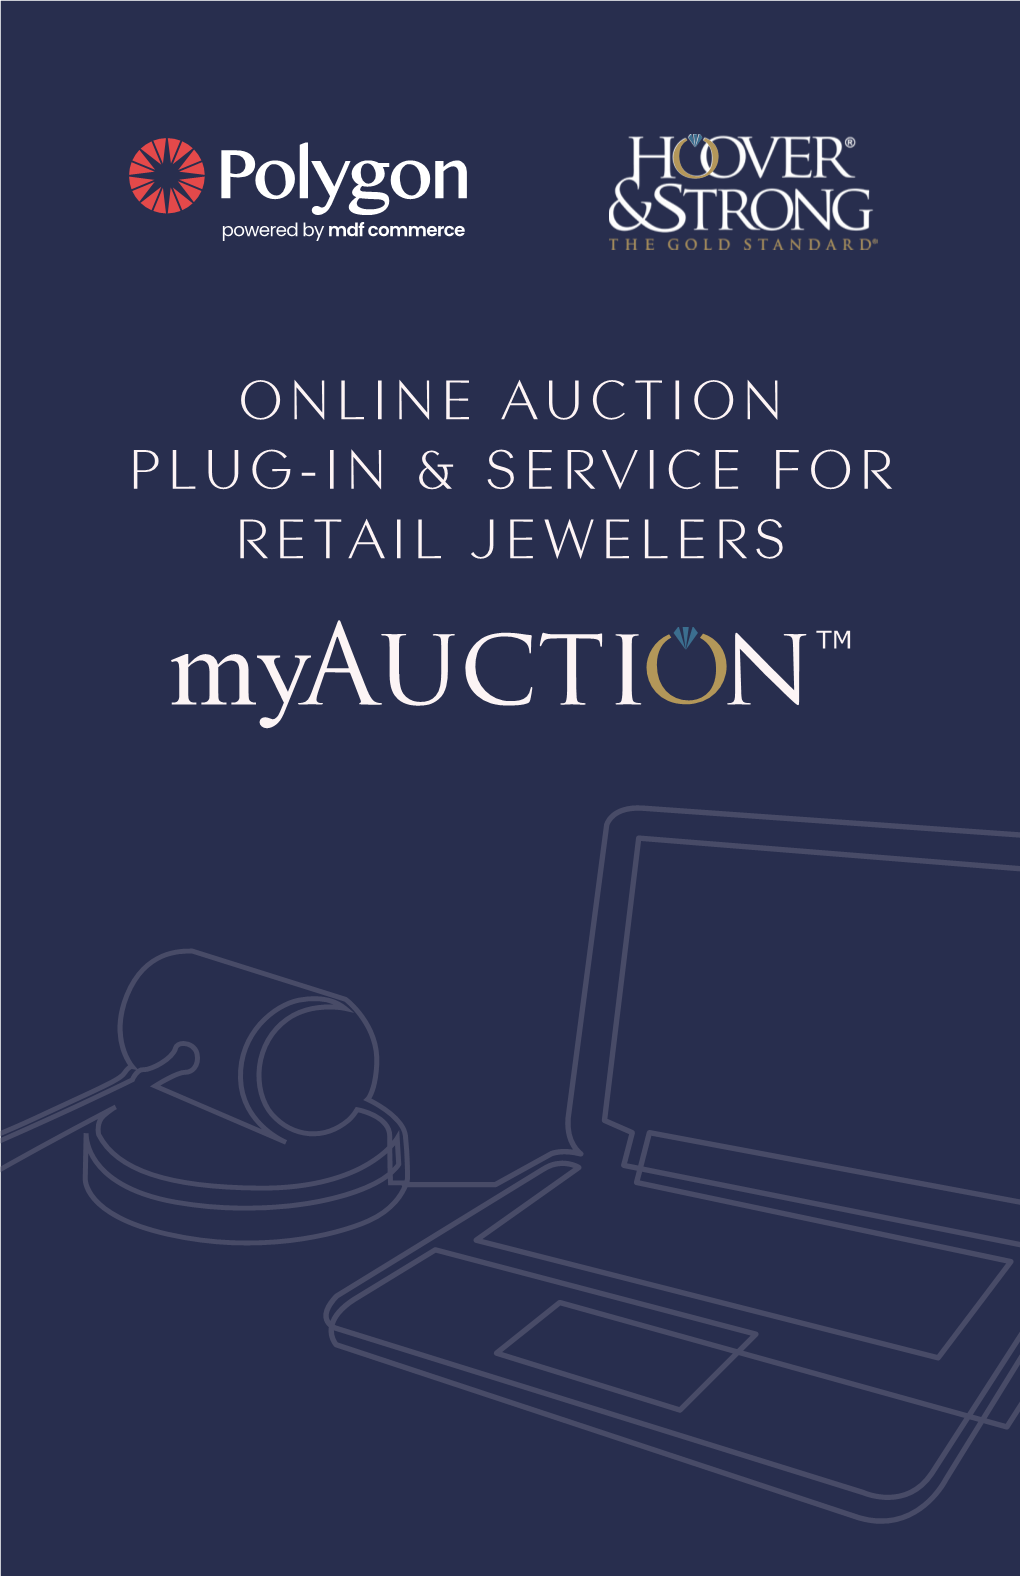 Online Auction Plug-In & Service for Retail Jewelers